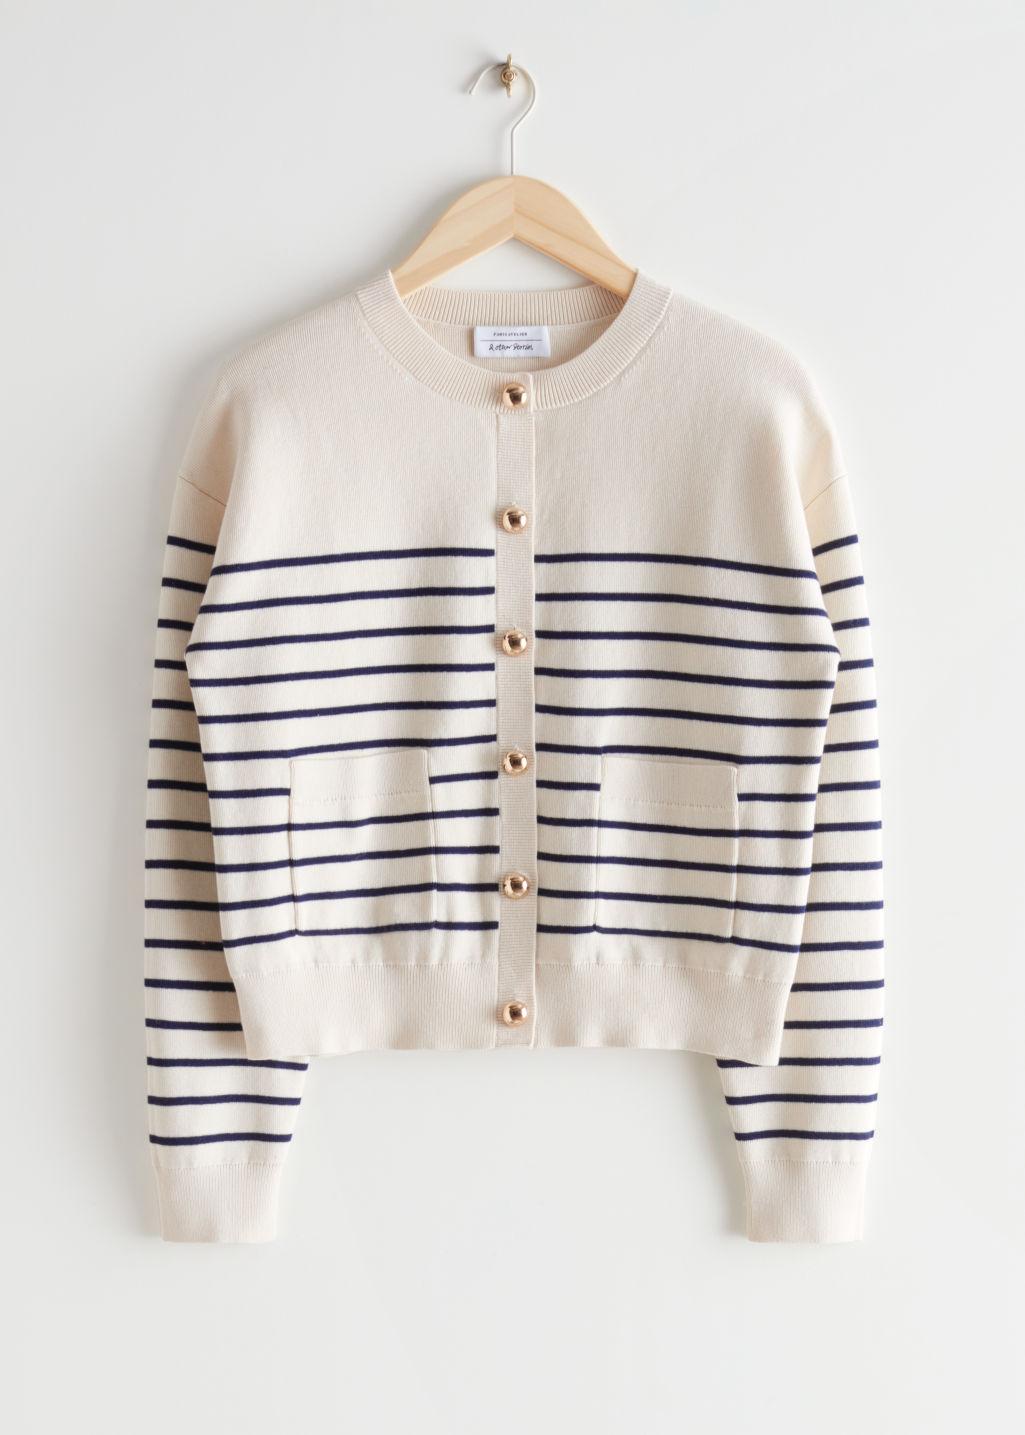 & Other Stories Striped Gold Button Cardigan in White | Lyst